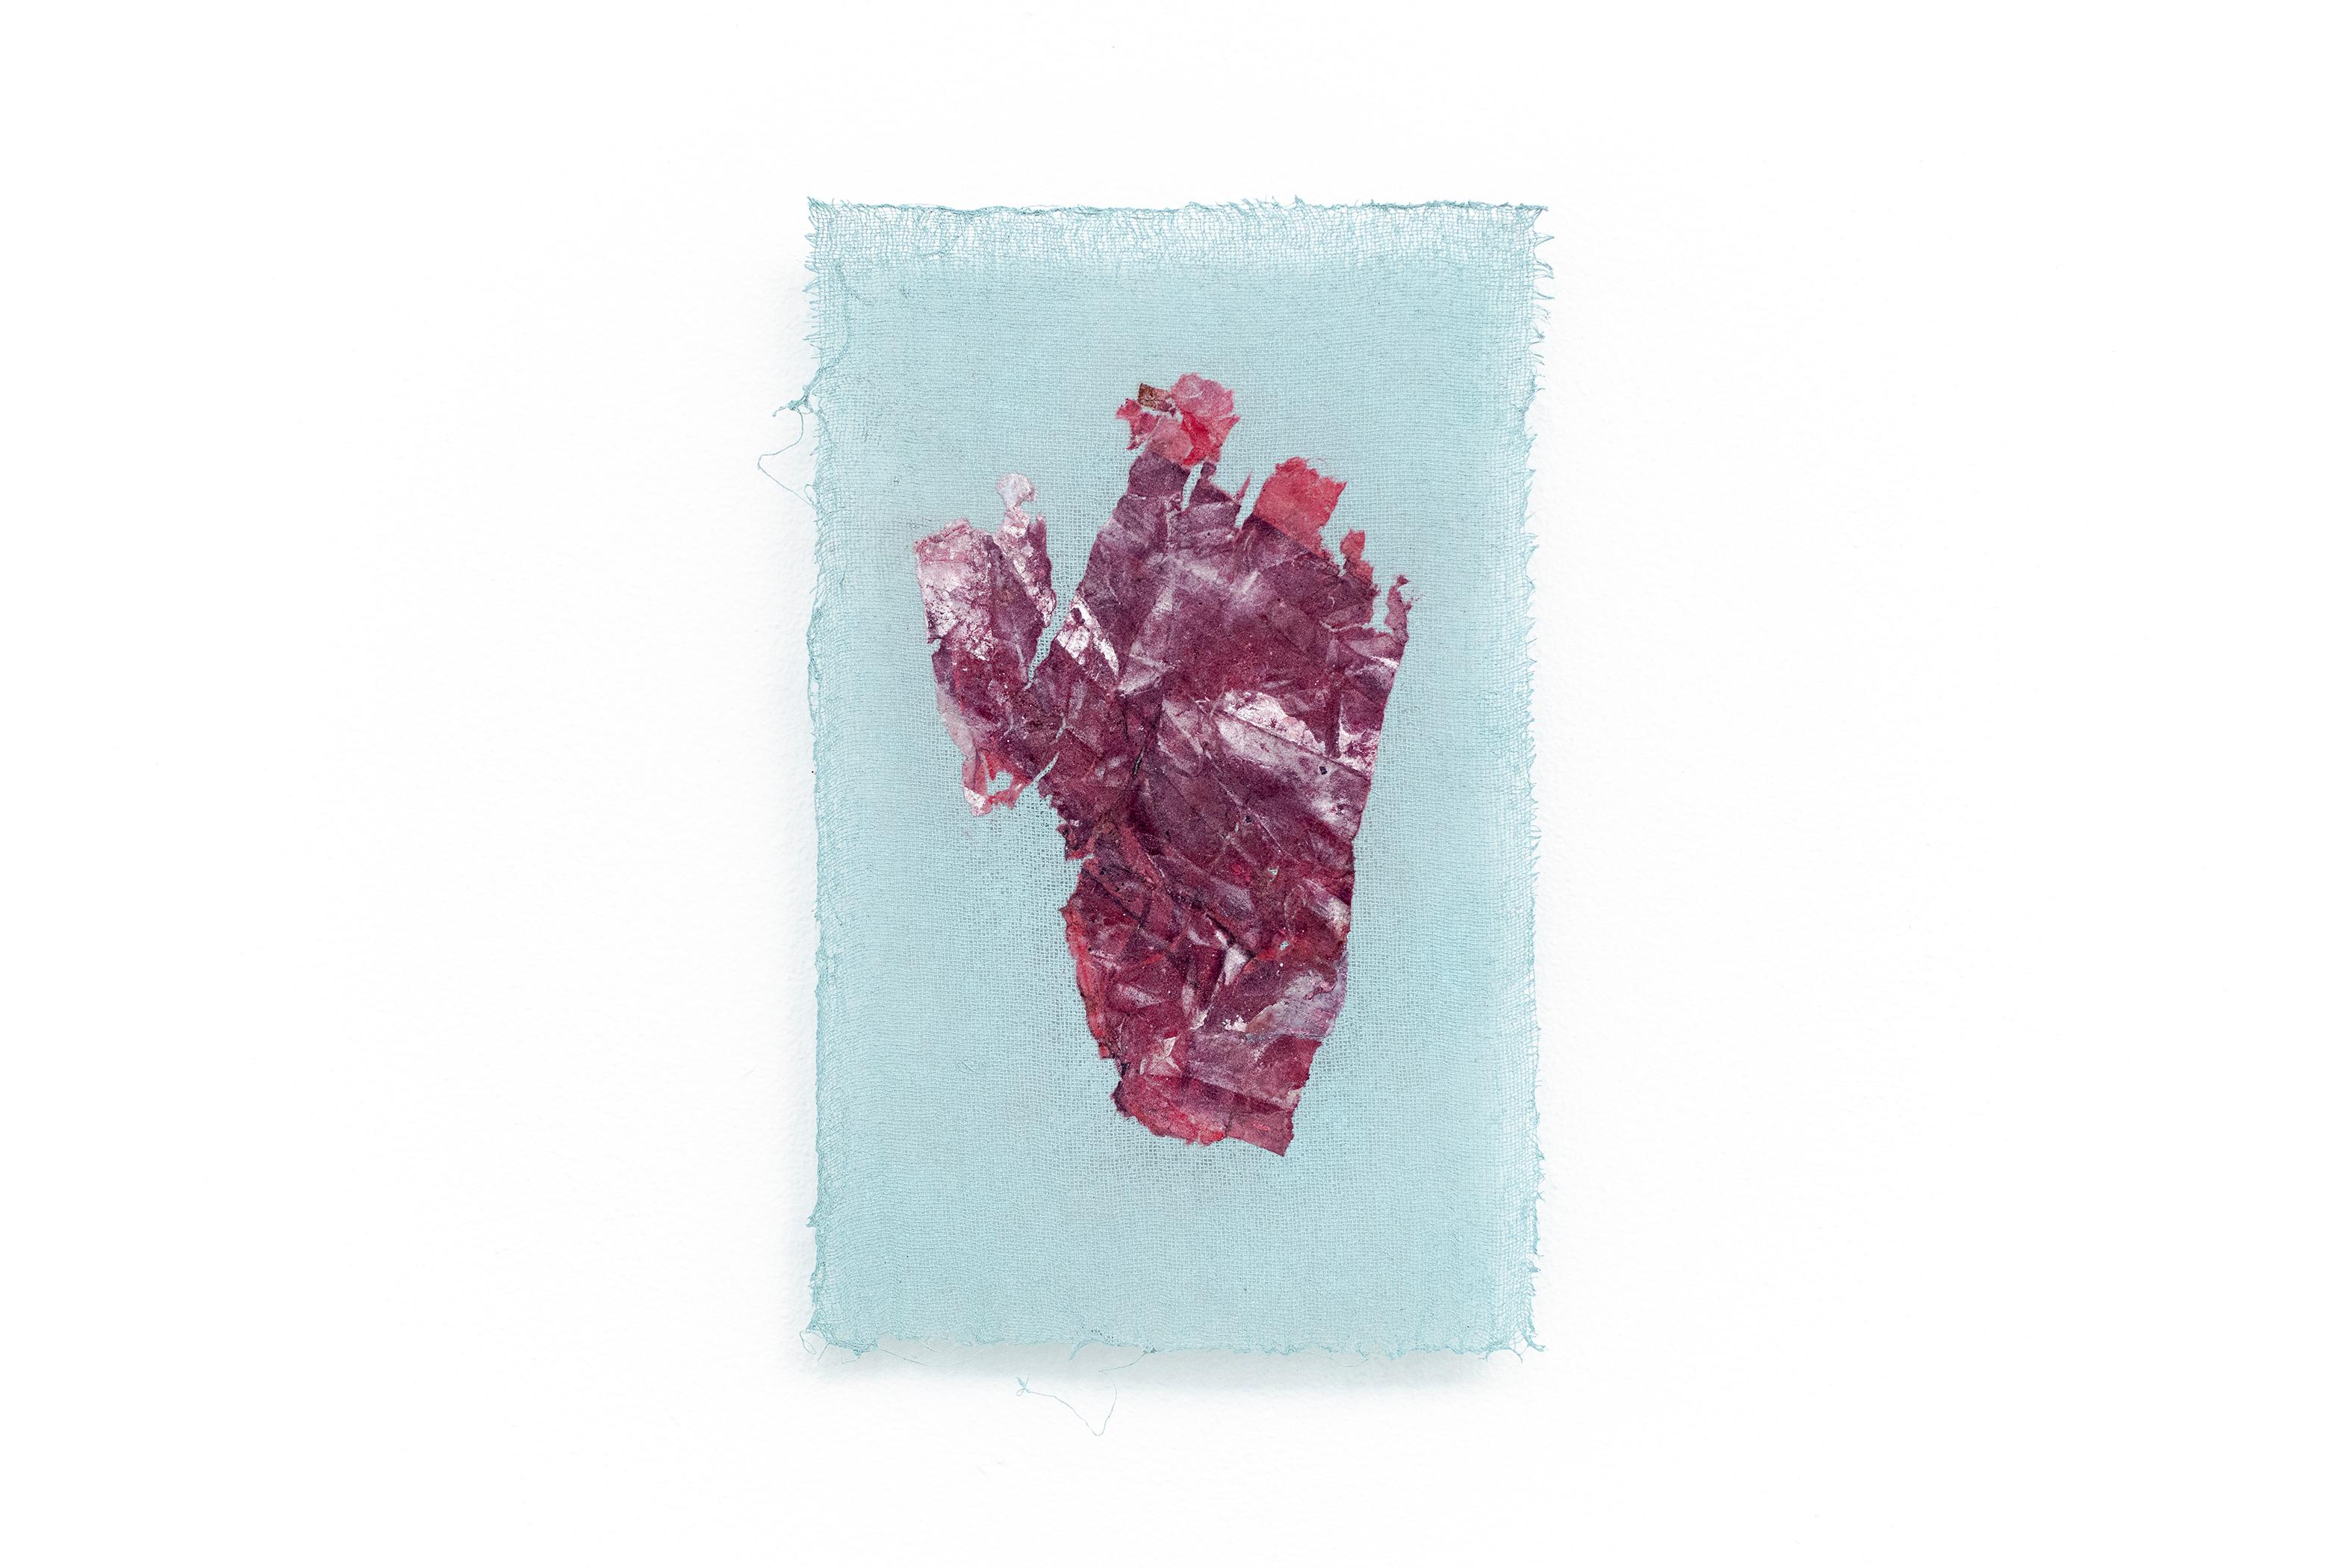 Heart, Mulberry paper and acrylic on gauze - Painting by Xinyi Liu